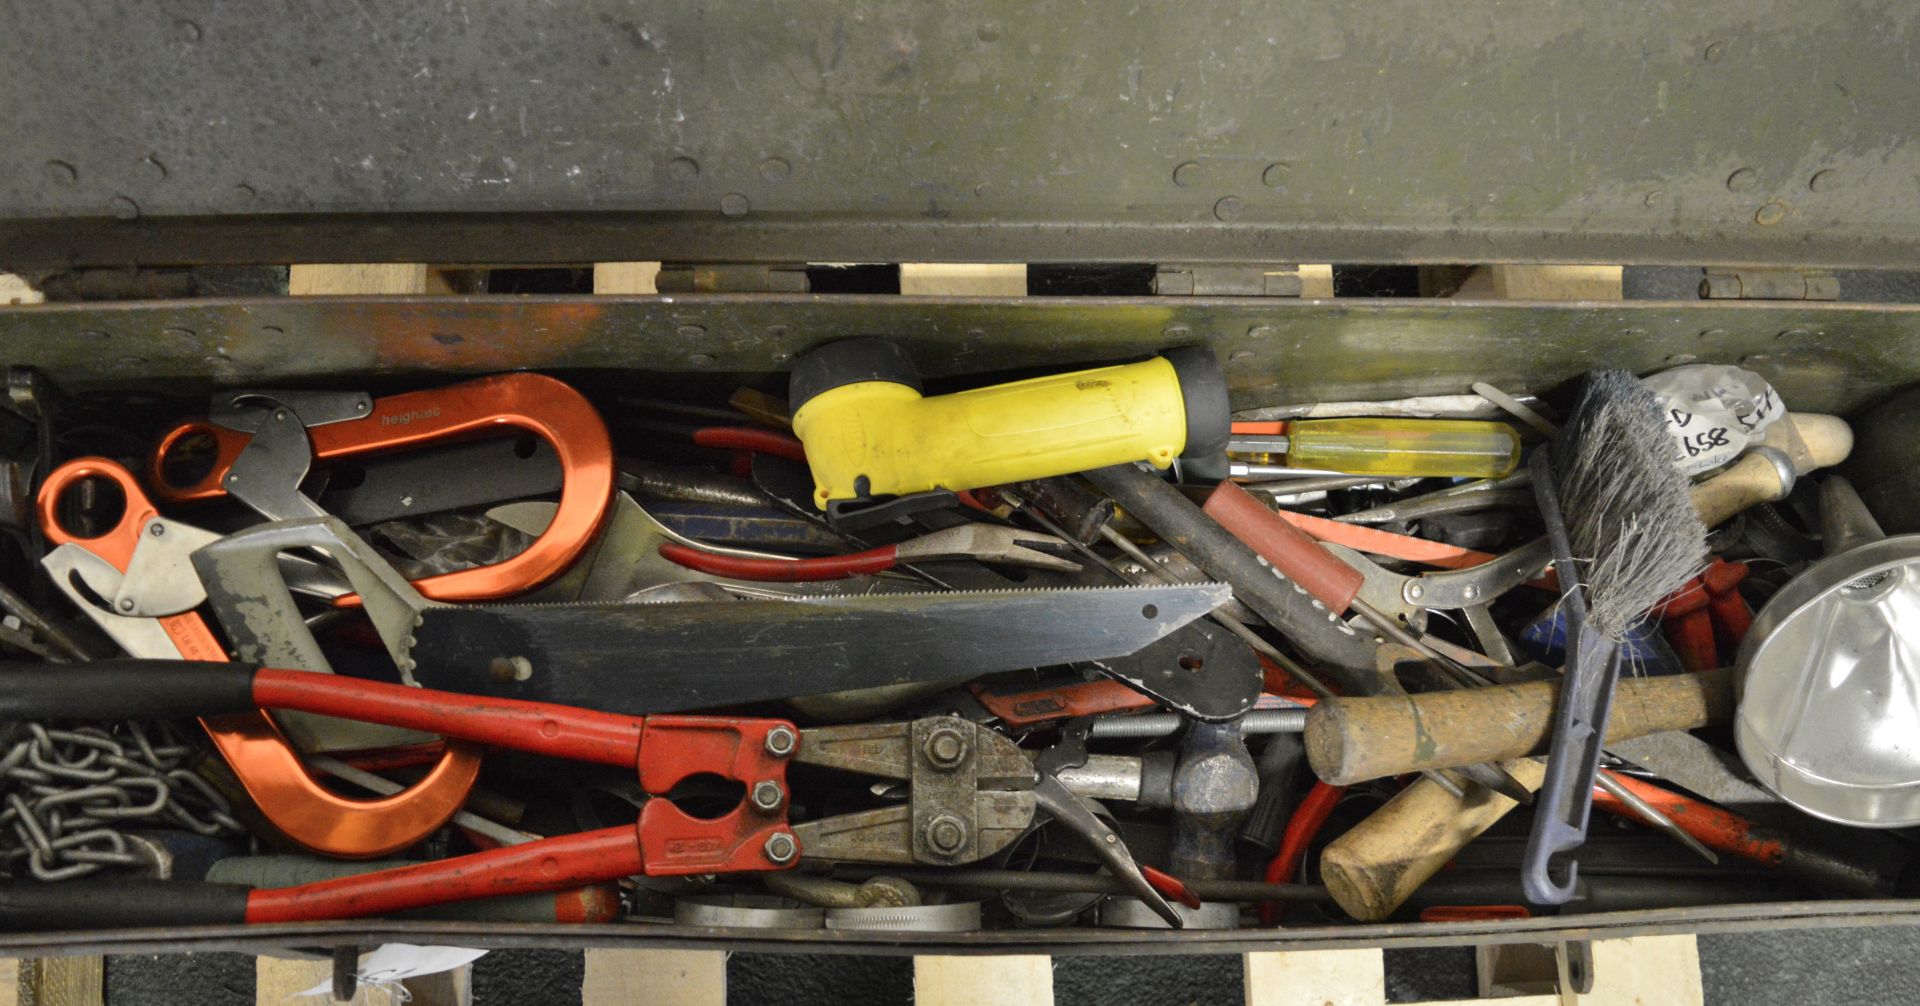 Toolbox with Saws, Hammers, Screwdrivers, Bolt Cutter, Pliers. - Image 2 of 2